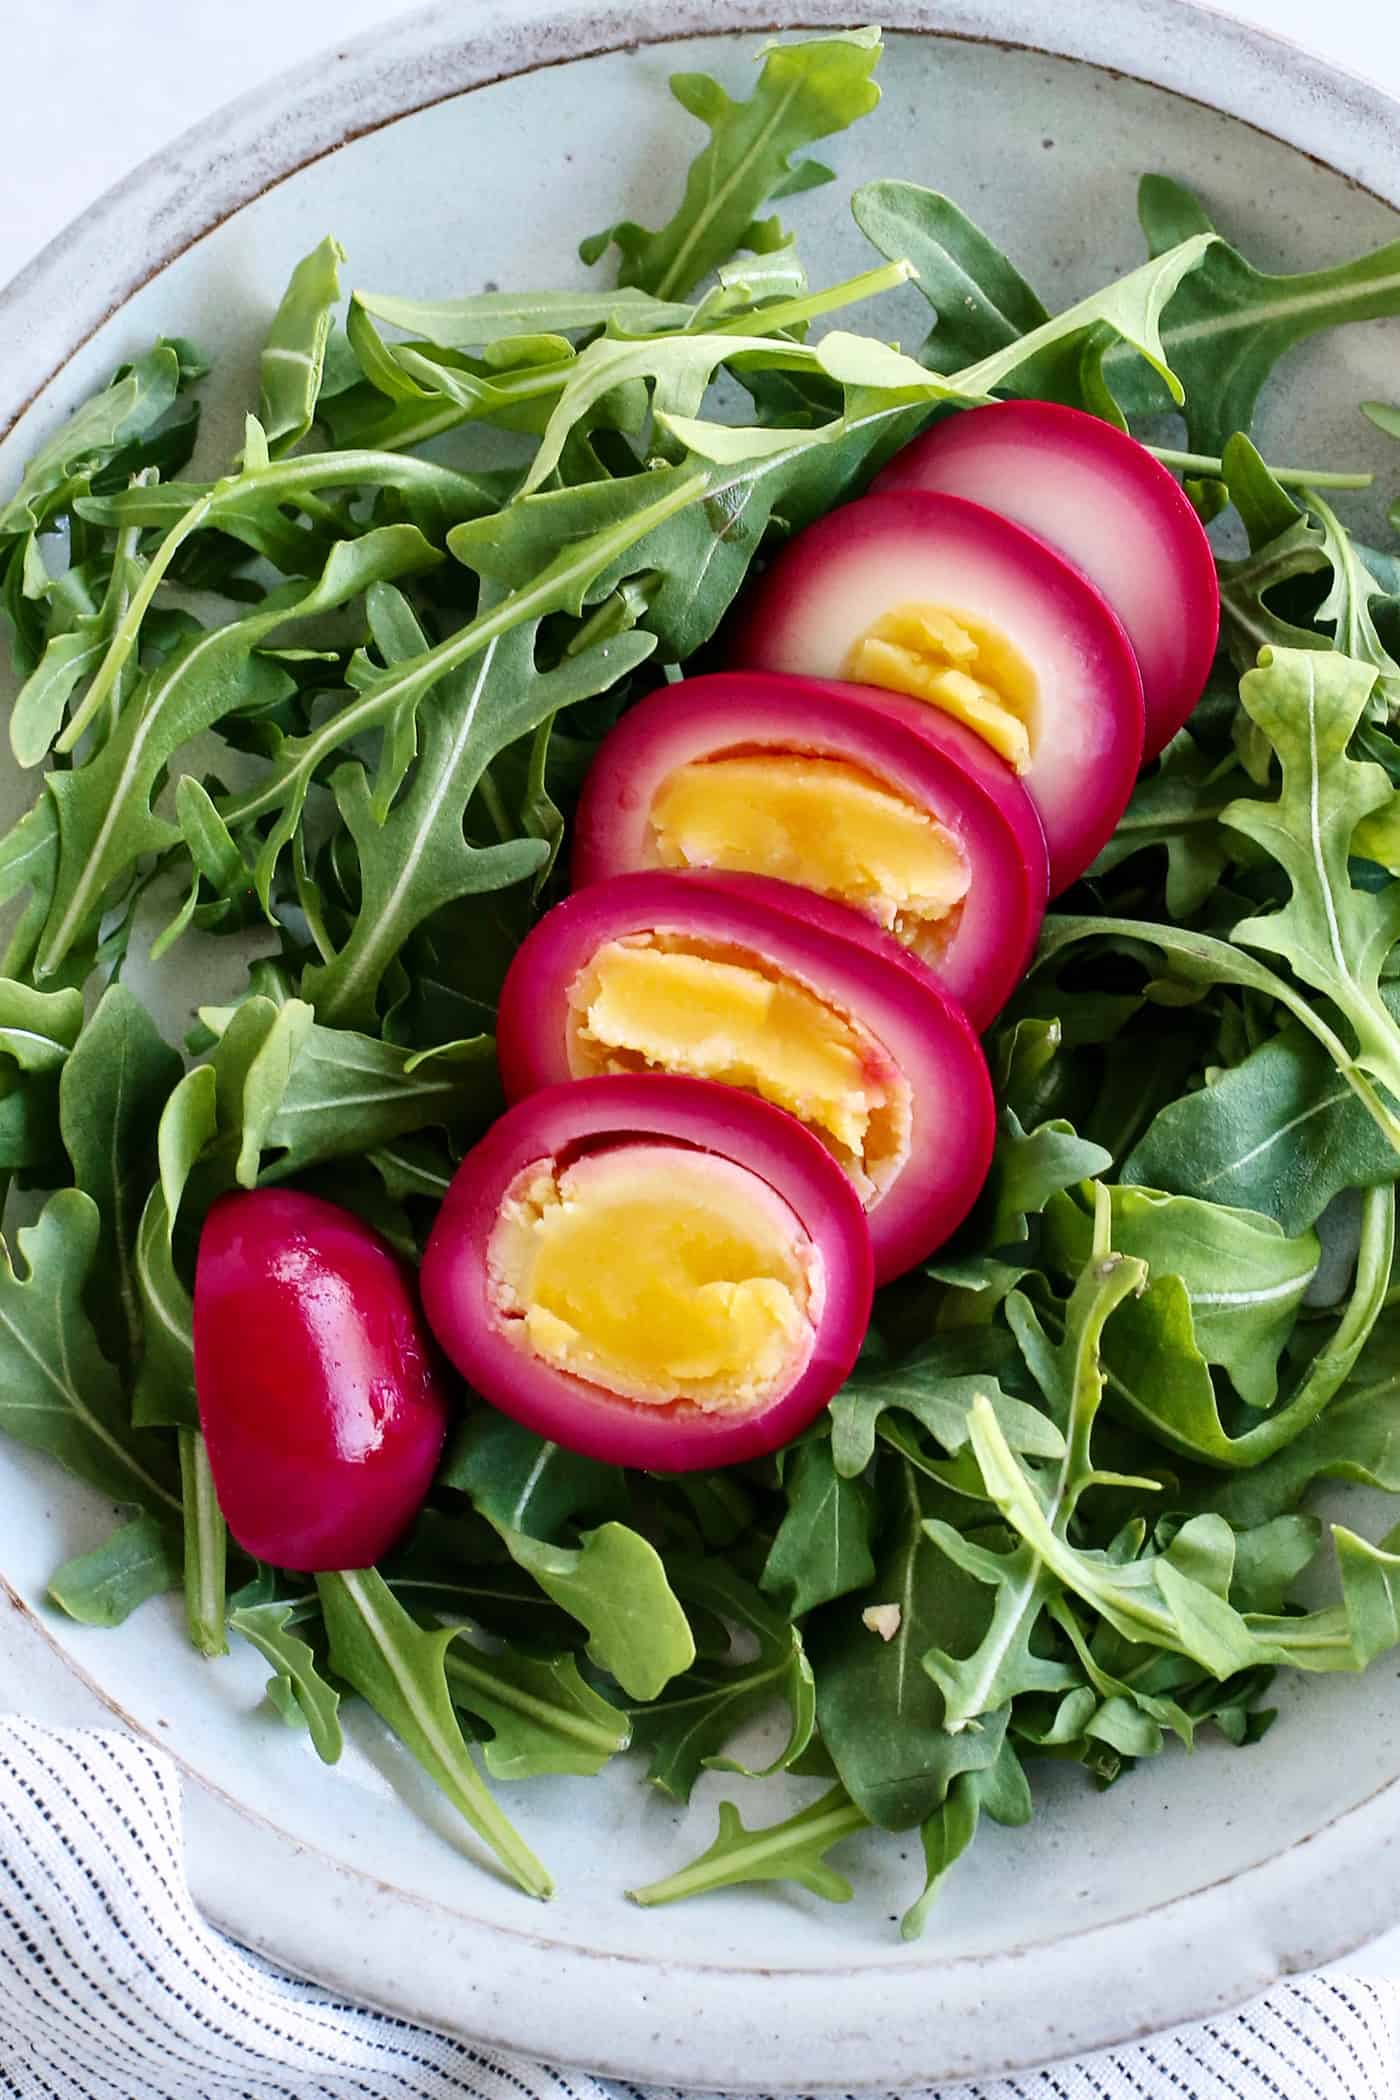 Sliced of beet pickled eggs on a bed of greens